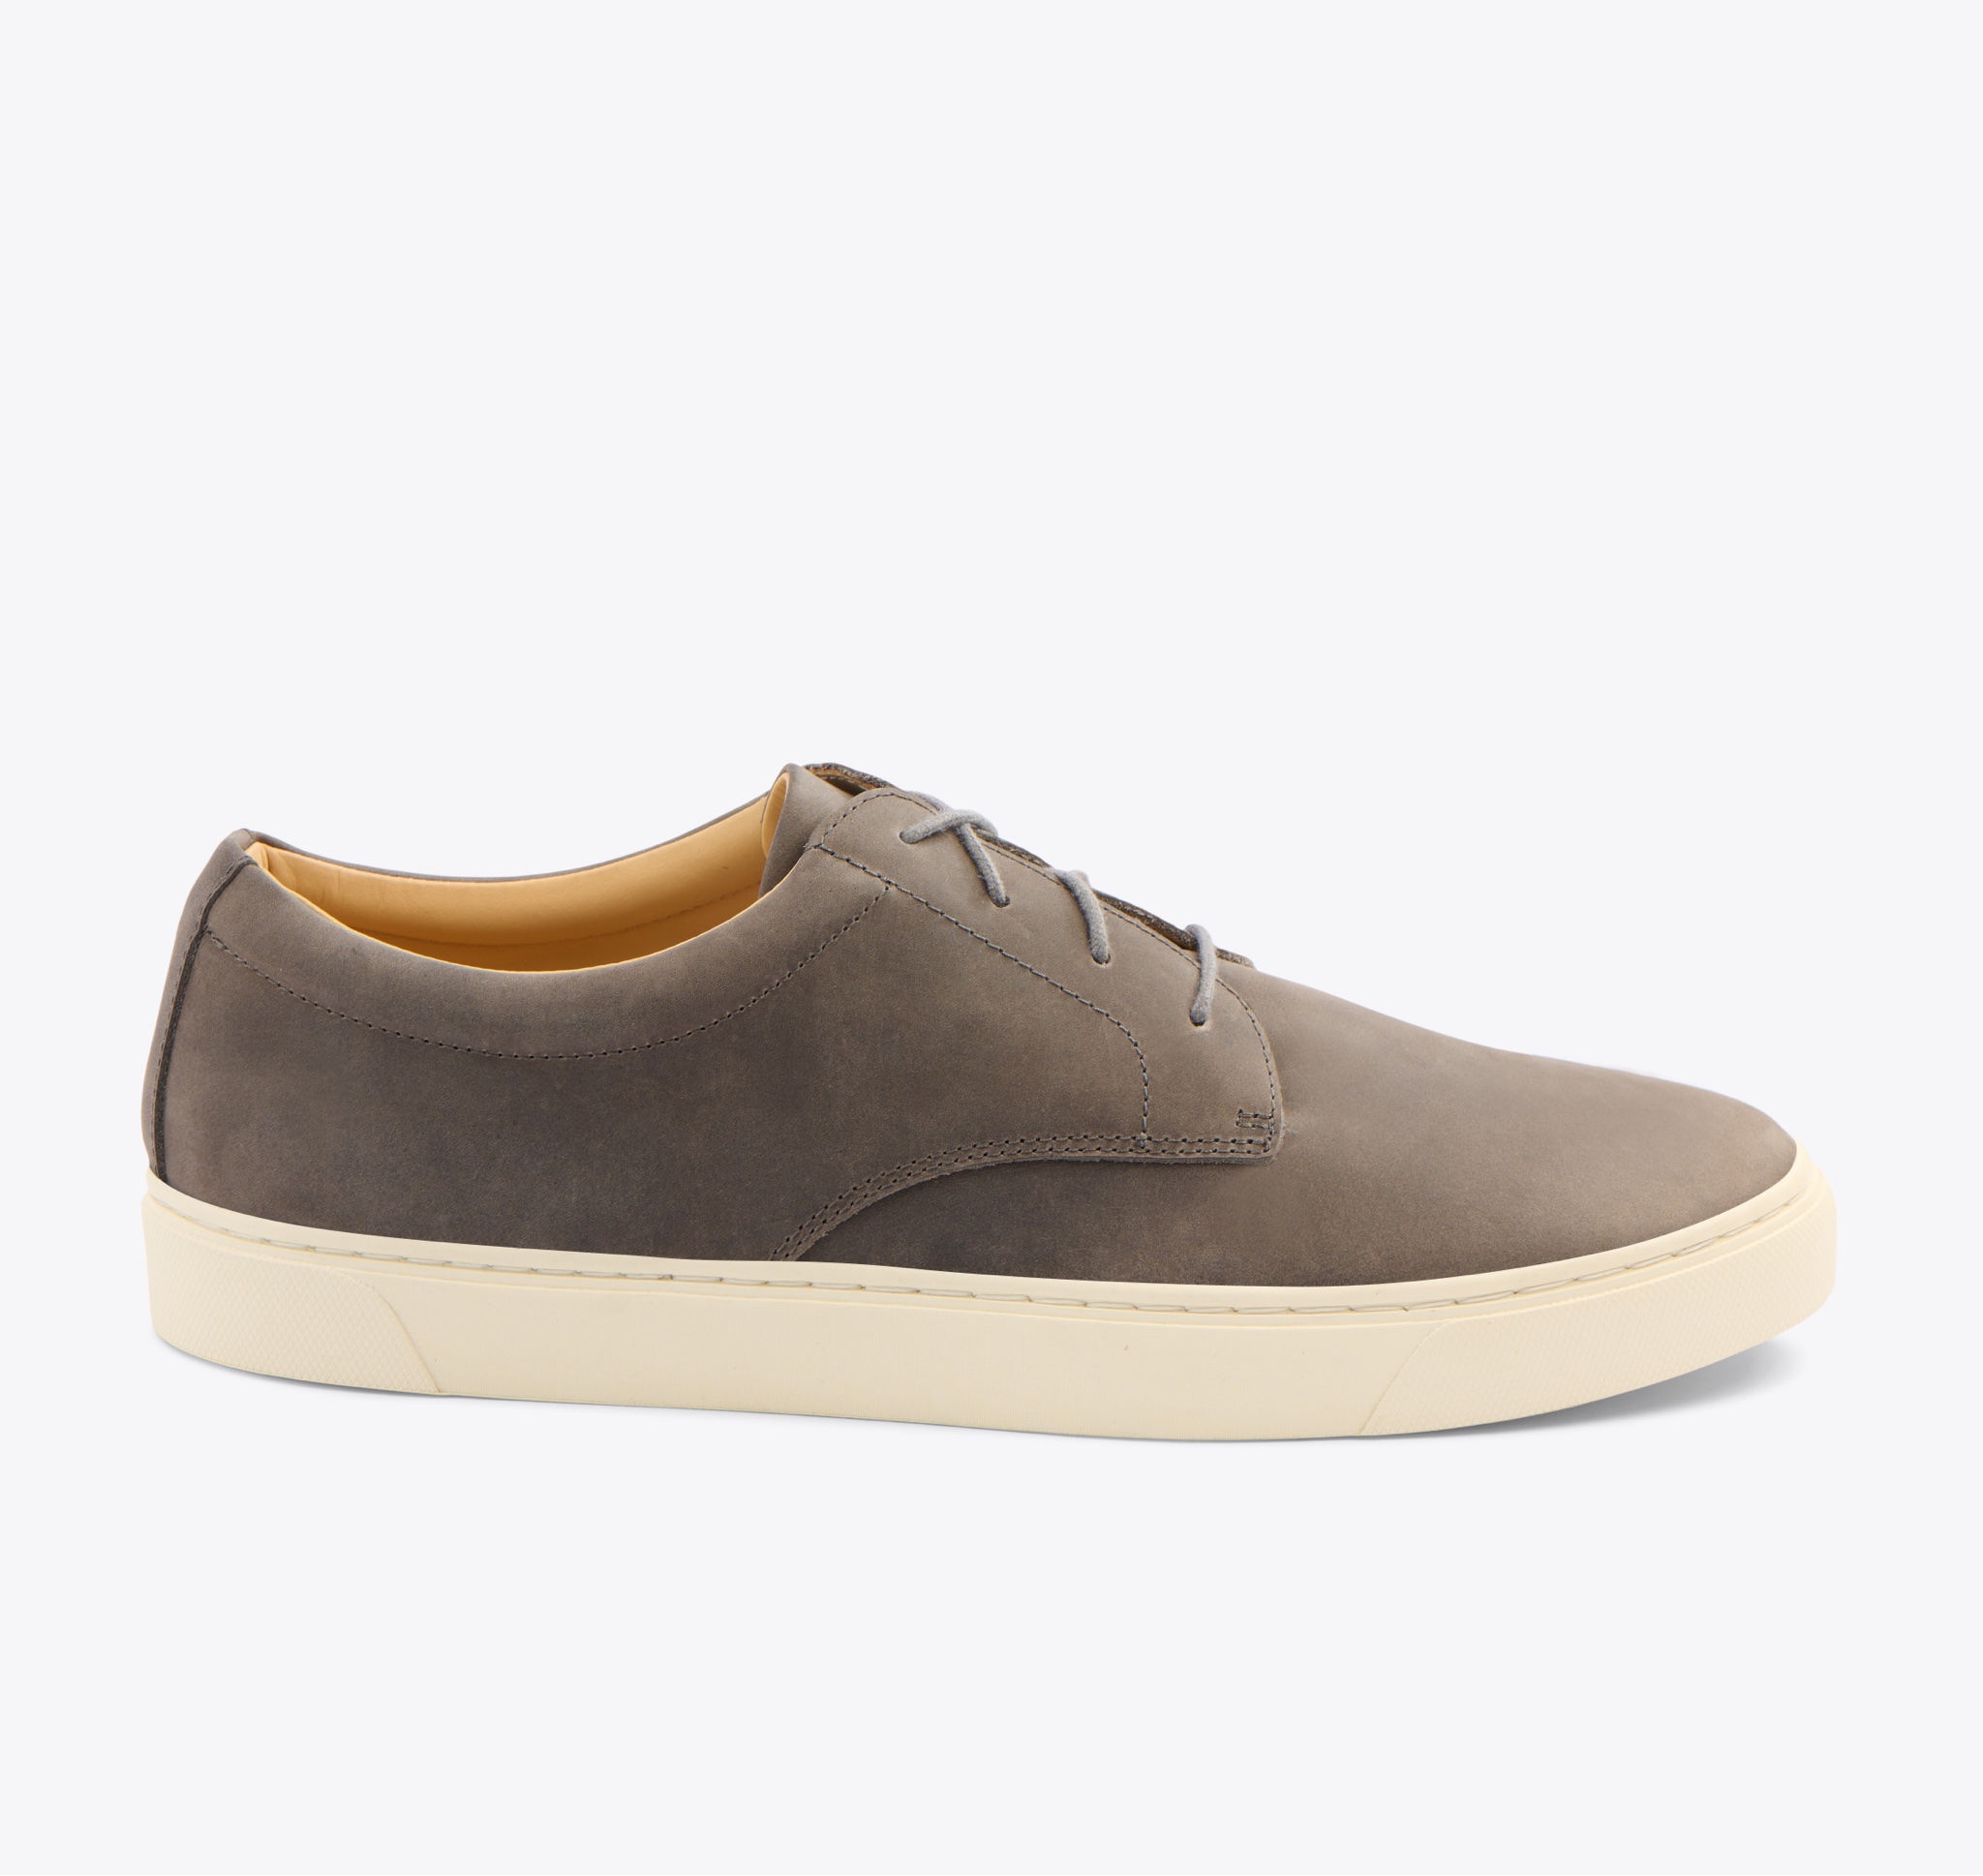 Nisolo Everyday Low Top Sneaker Grey - Every Nisolo product is built on the foundation of comfort, function, and design. 